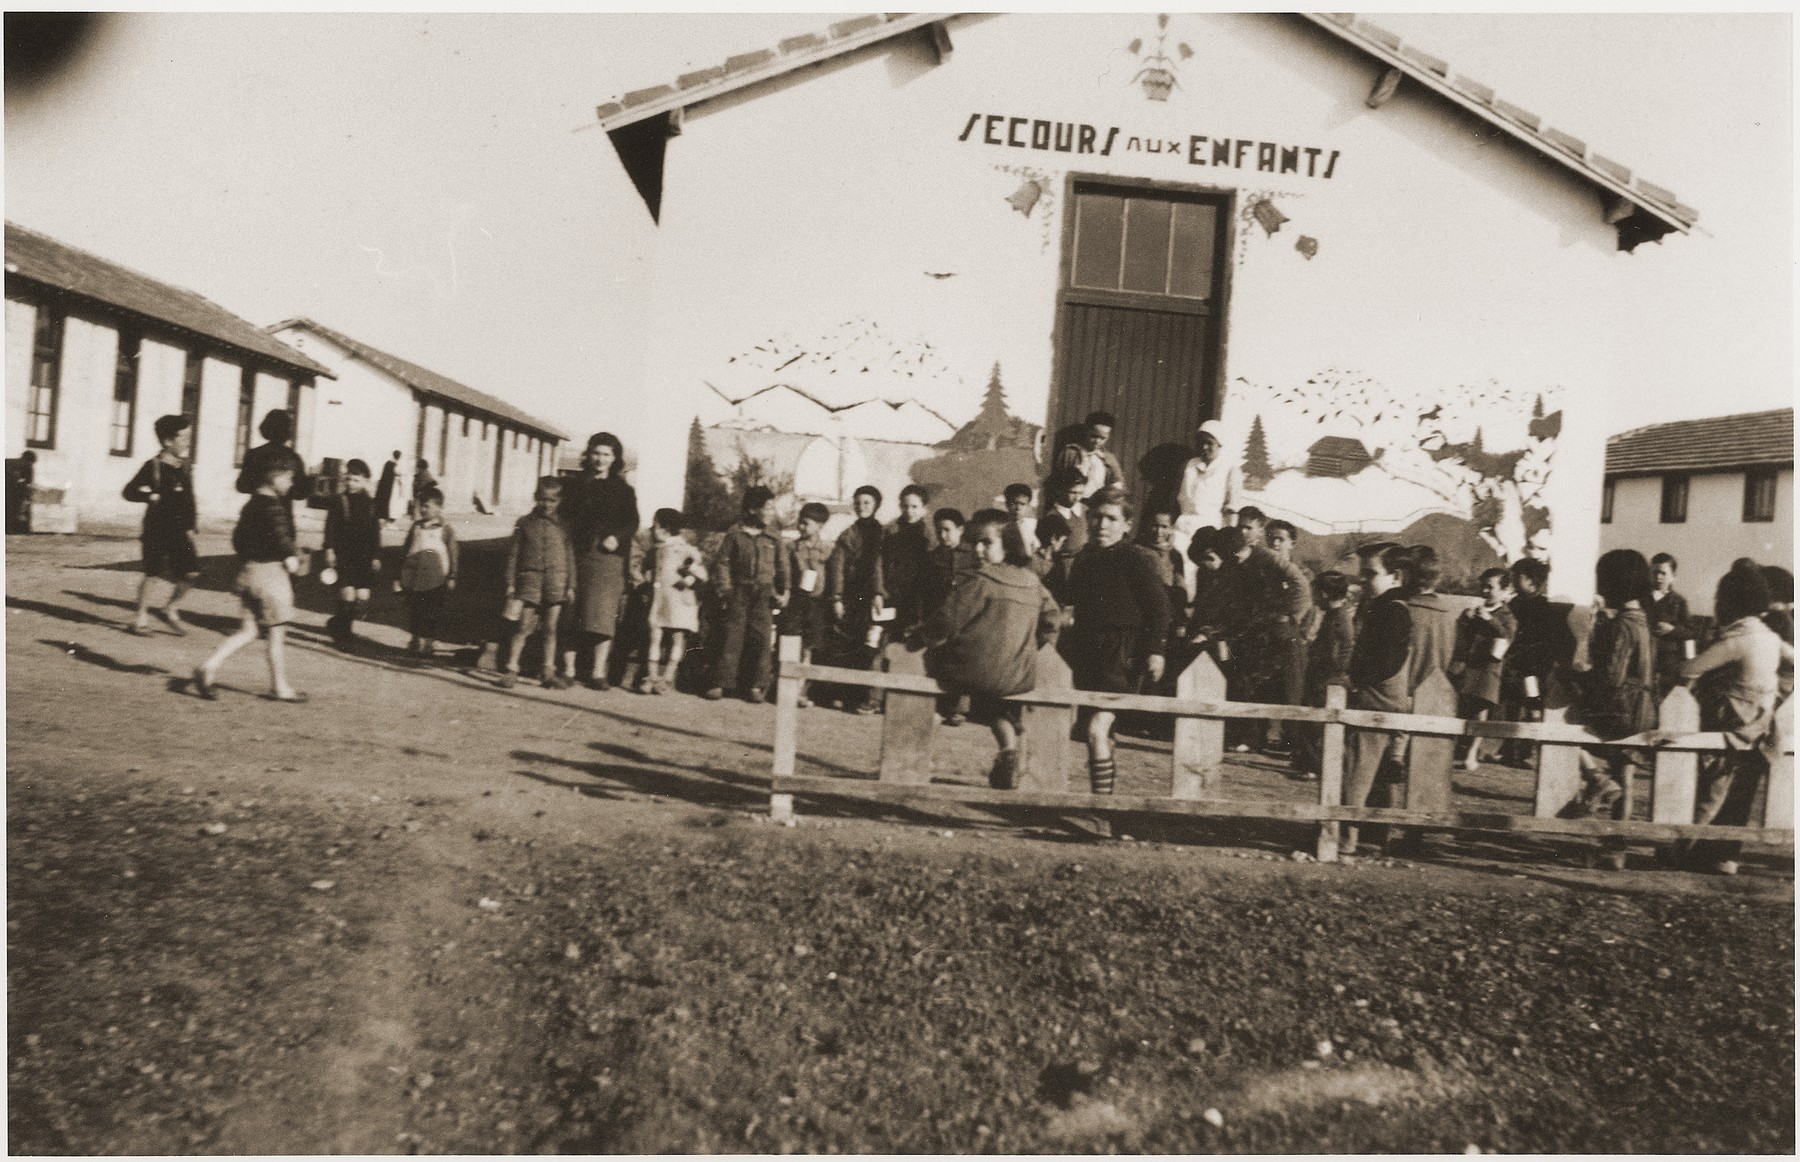 Children wait outside the Secours Suisse barracks for a meal to be served.